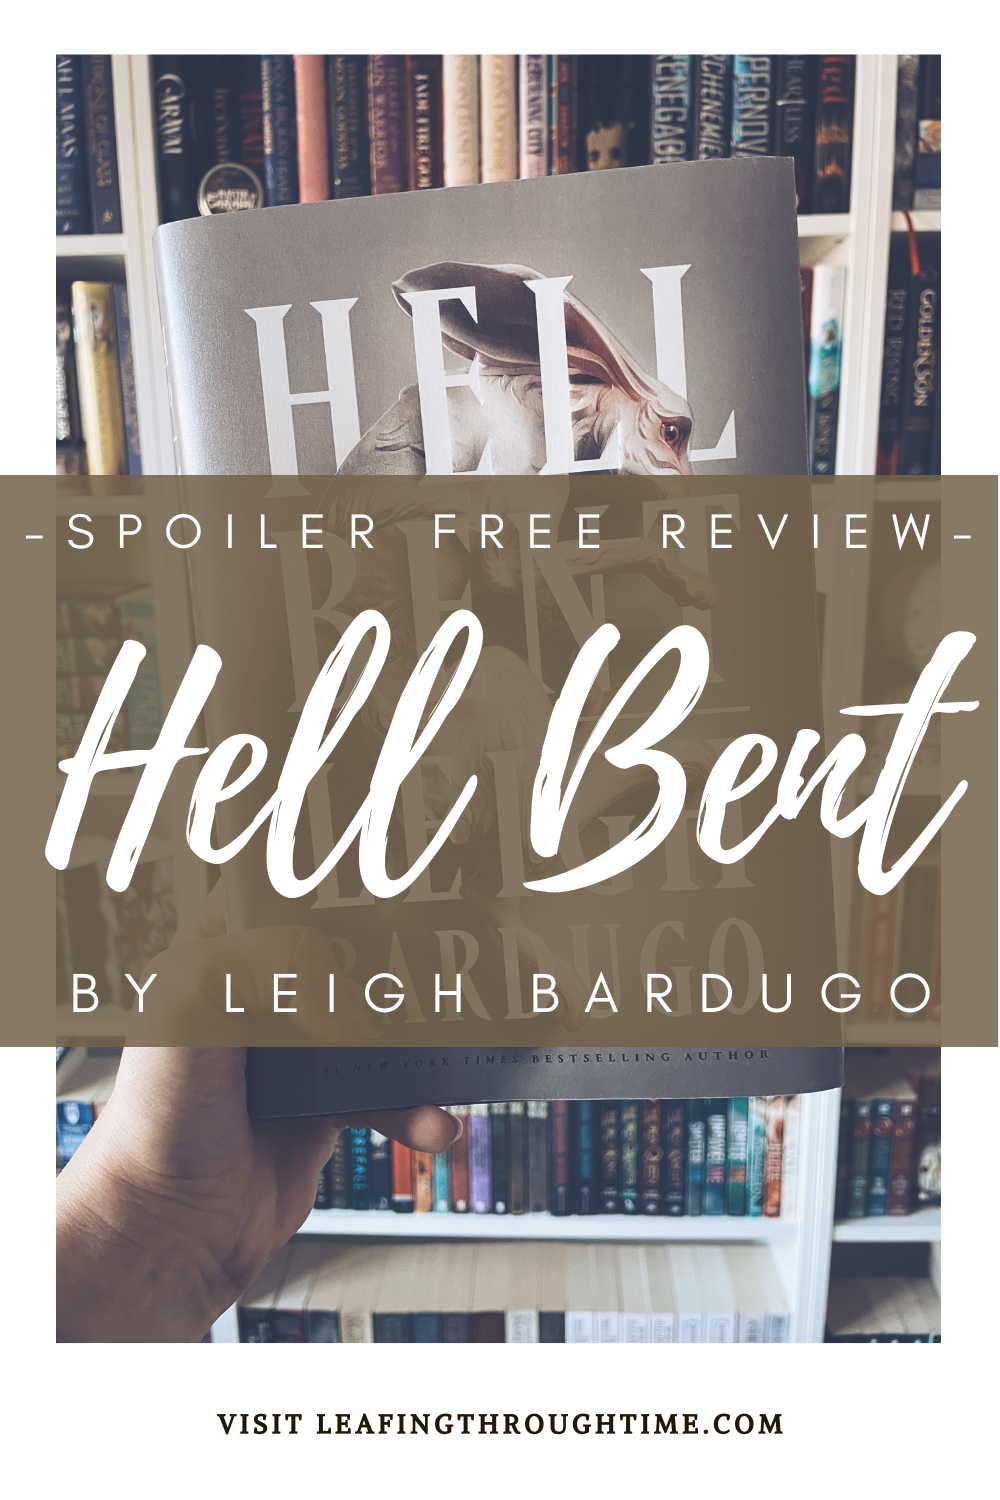 Hell Bent – Spoiler Free Review